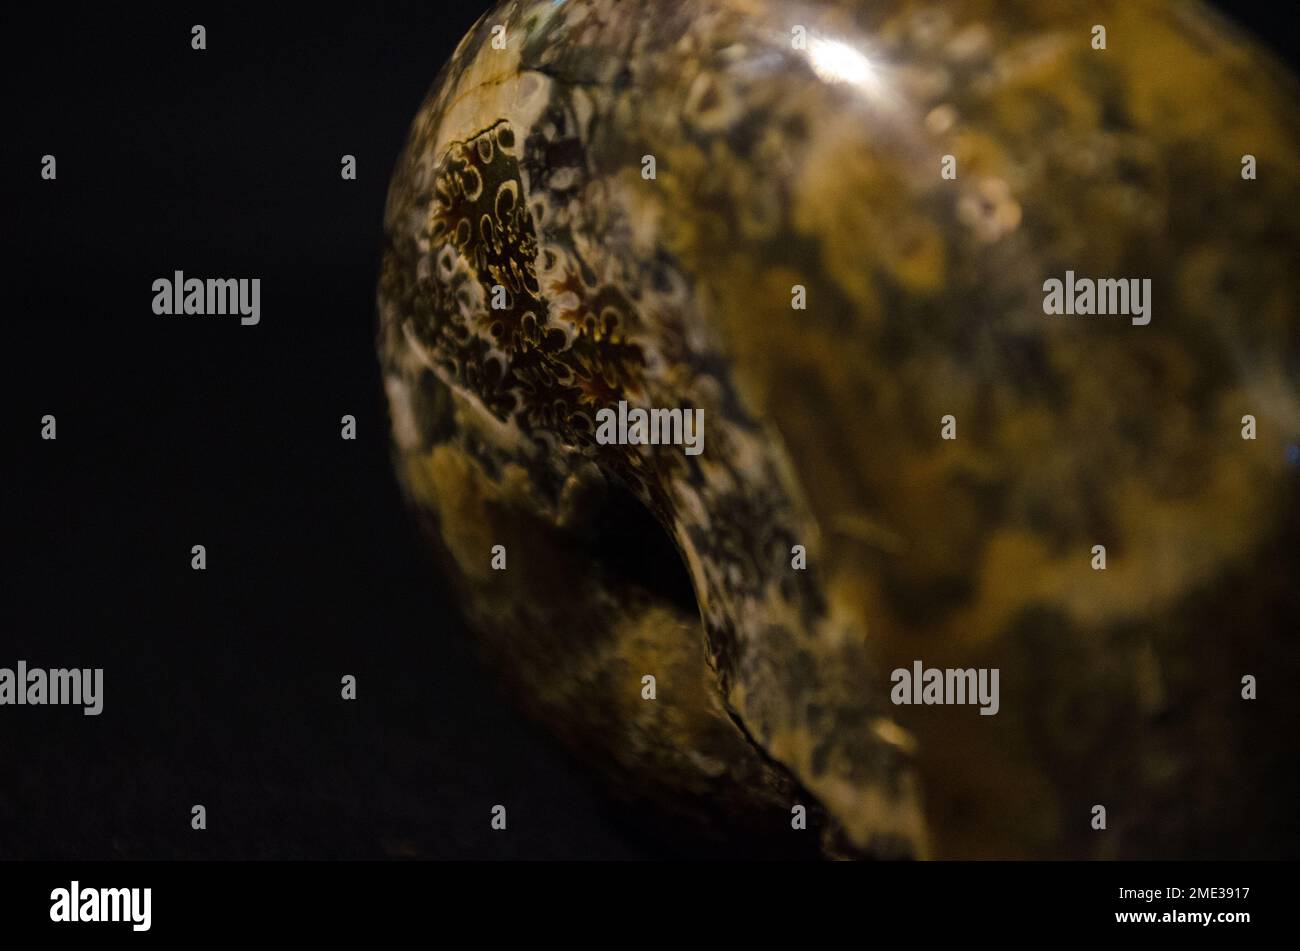 Close-up of an ammonite fossil on a black background Stock Photo